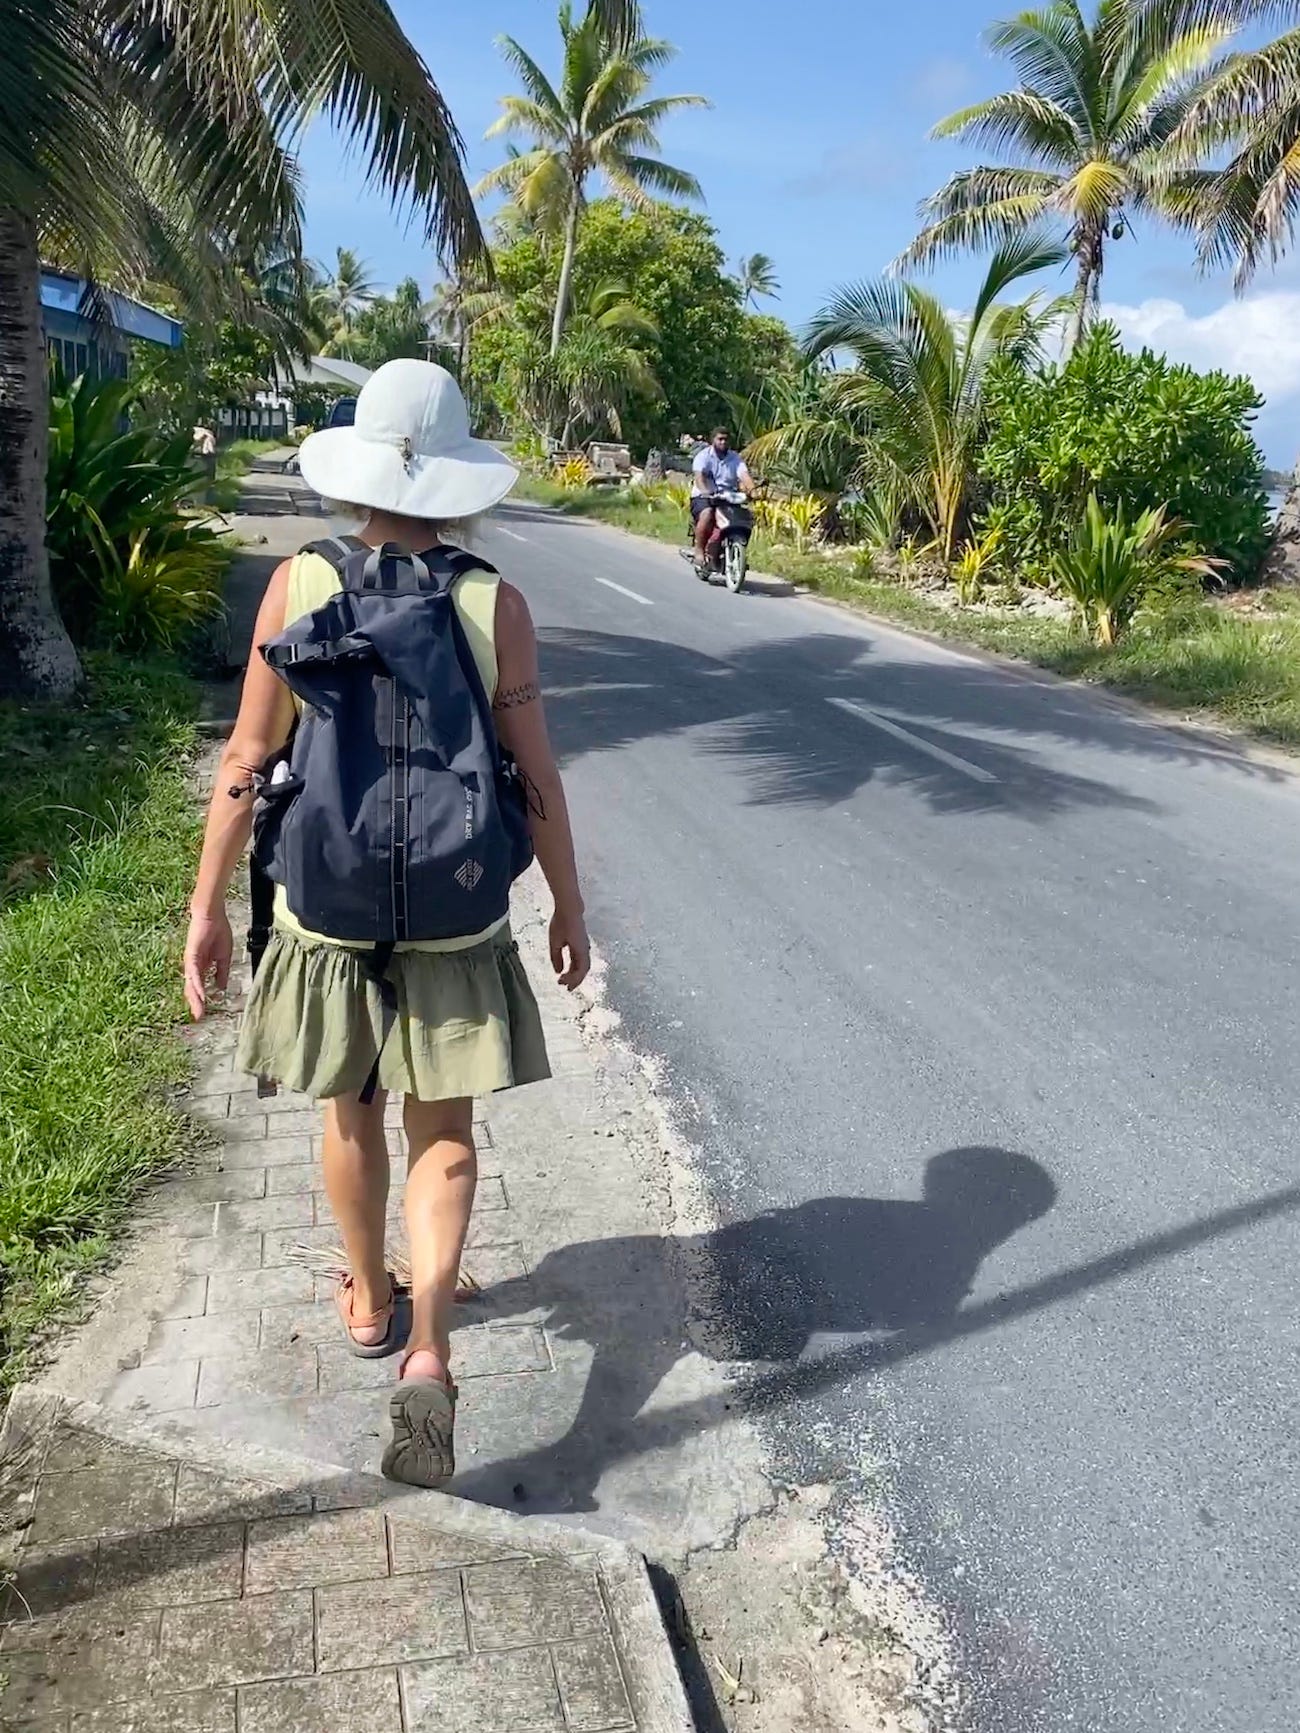 A woman wearing a skirt and a big sunhat walks along a paved road with tropical trees and plants alongside